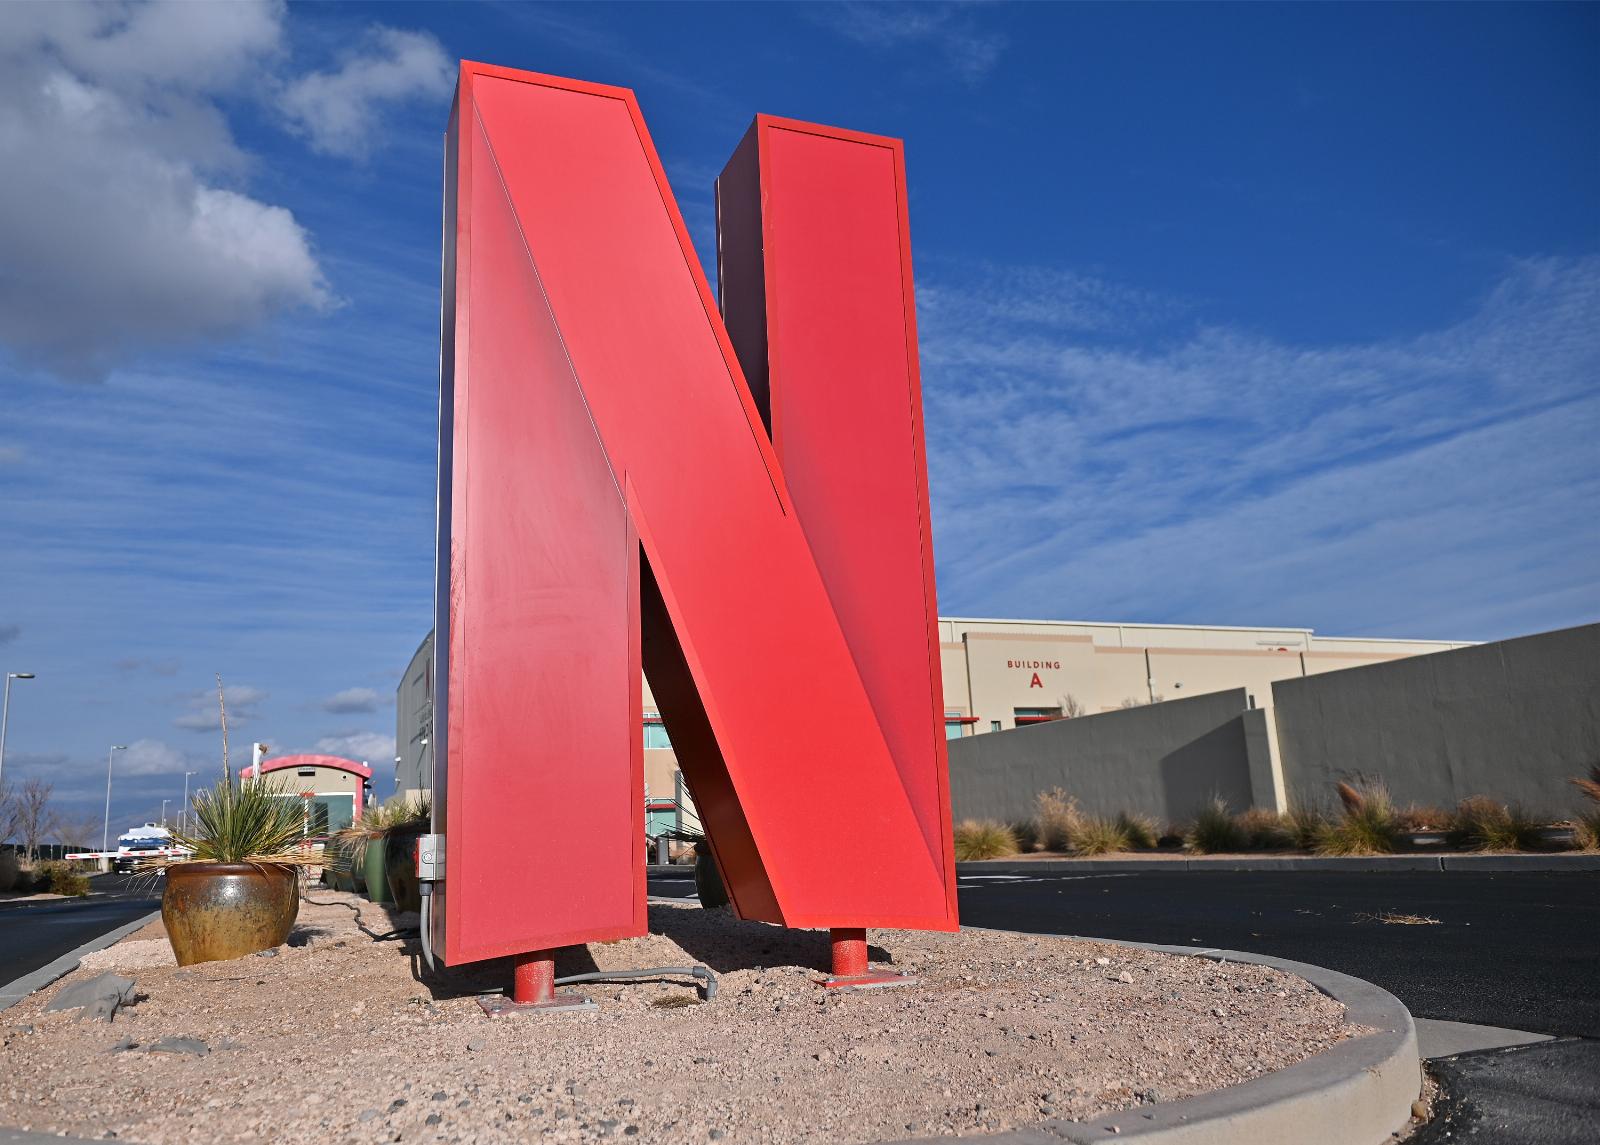 Netflix reportedly plans to cut spending by $300 million this year